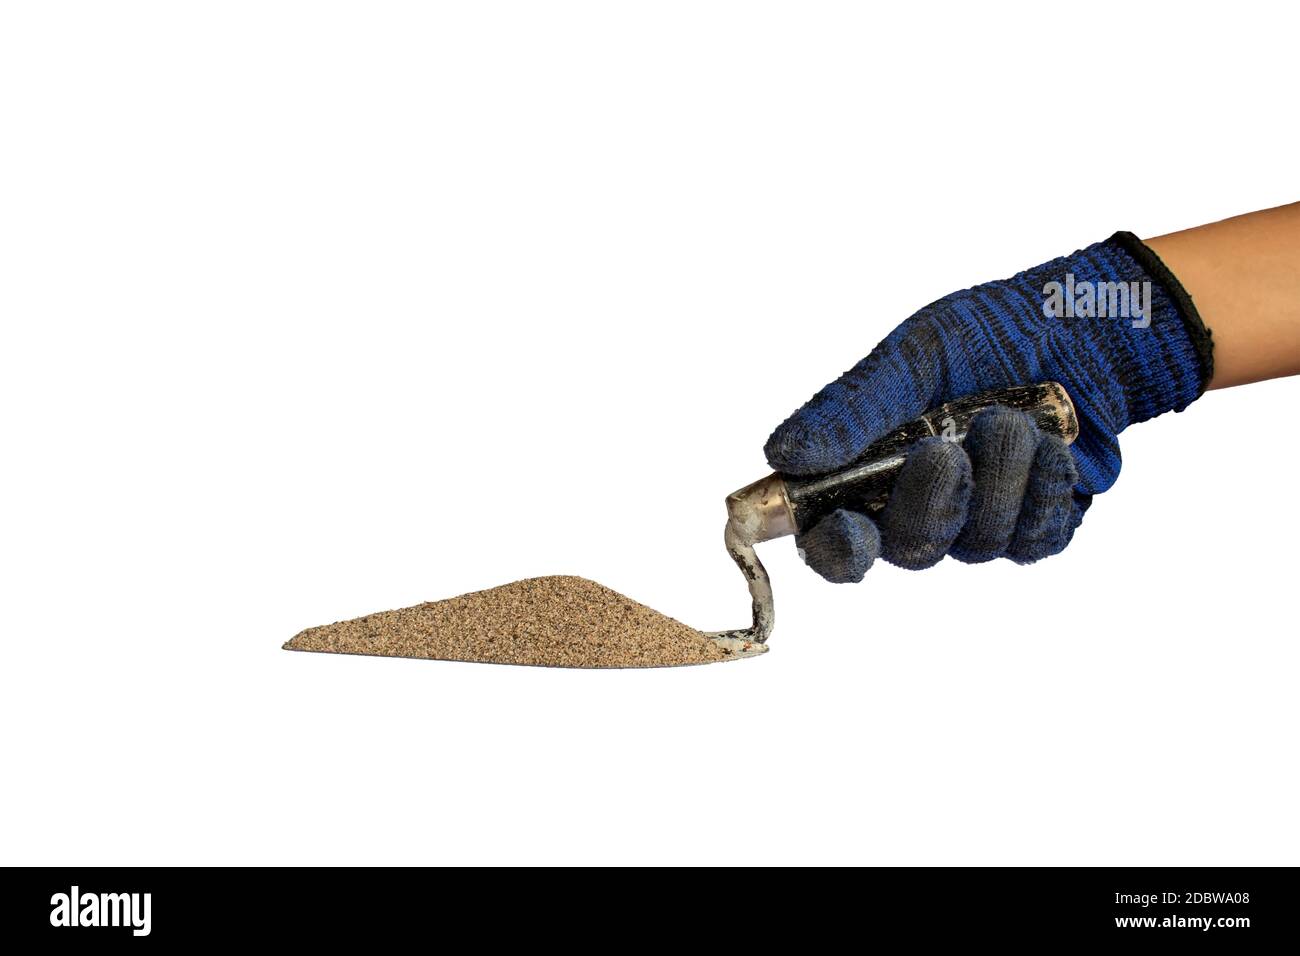 Sand for mixing cement on a plastering trowel, including the hands of a builder olated on white background with the clipping path. Stock Photo